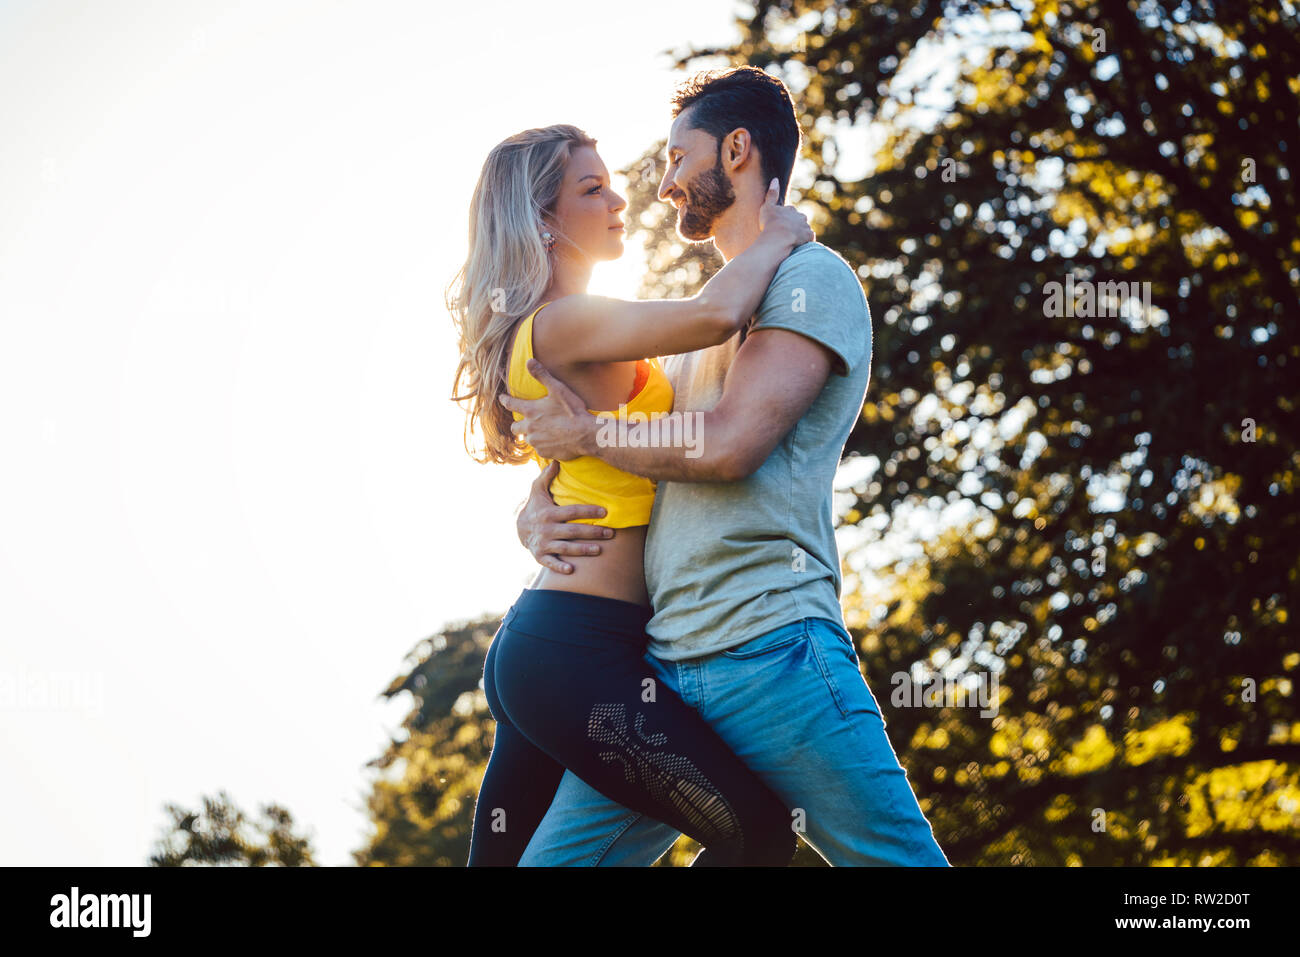 Professional dance couple showing how it should look like Stock Photo